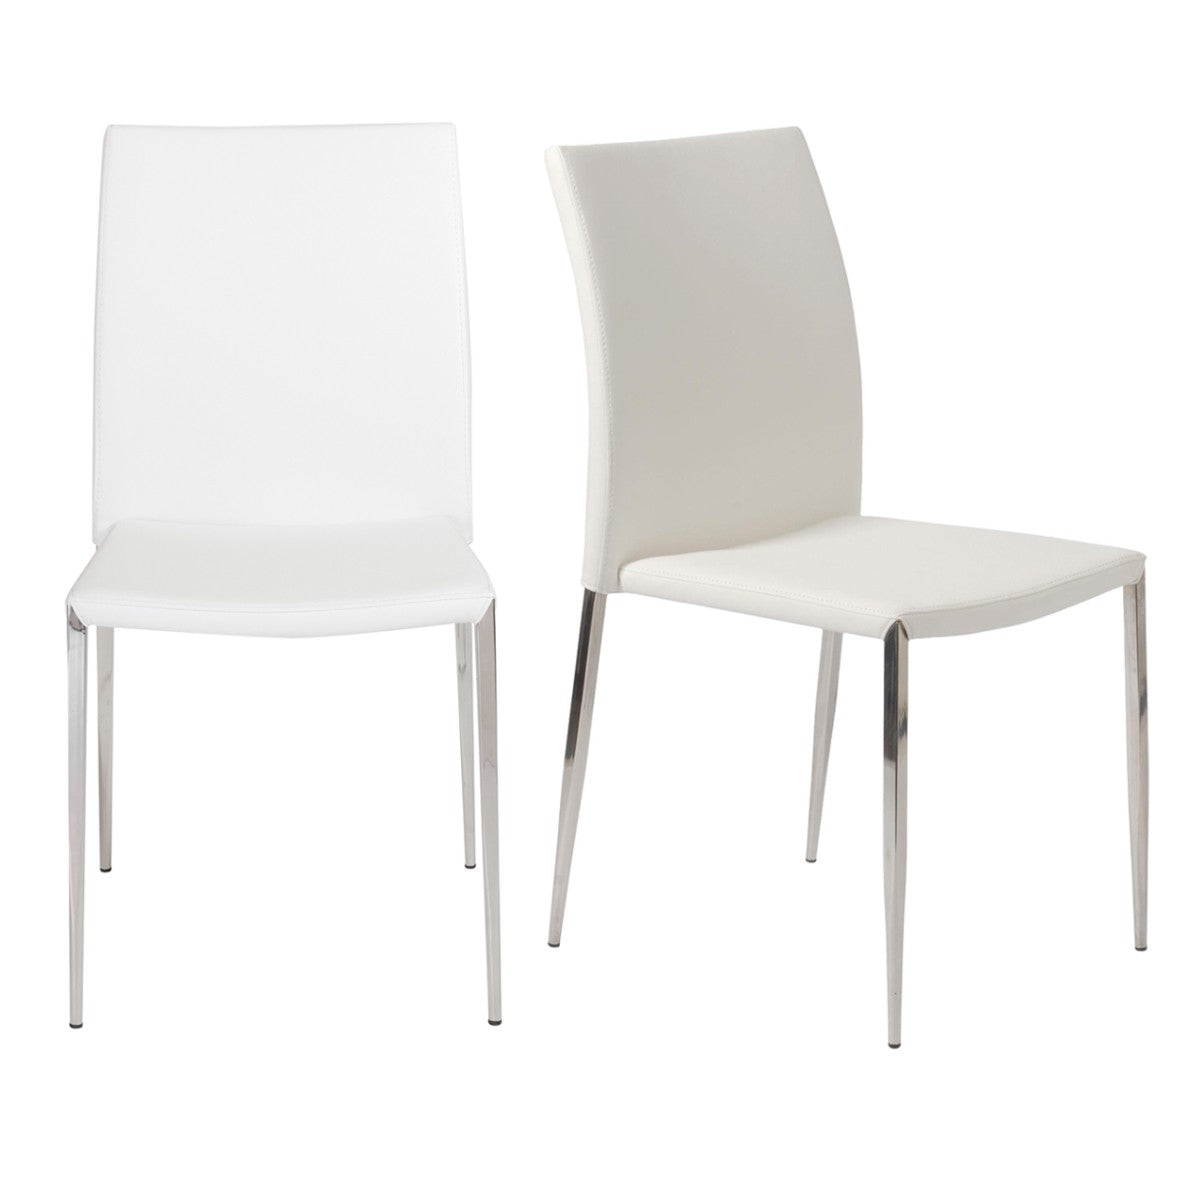 Set of Two White Faux Faux Leather Steel Stacking Chairs